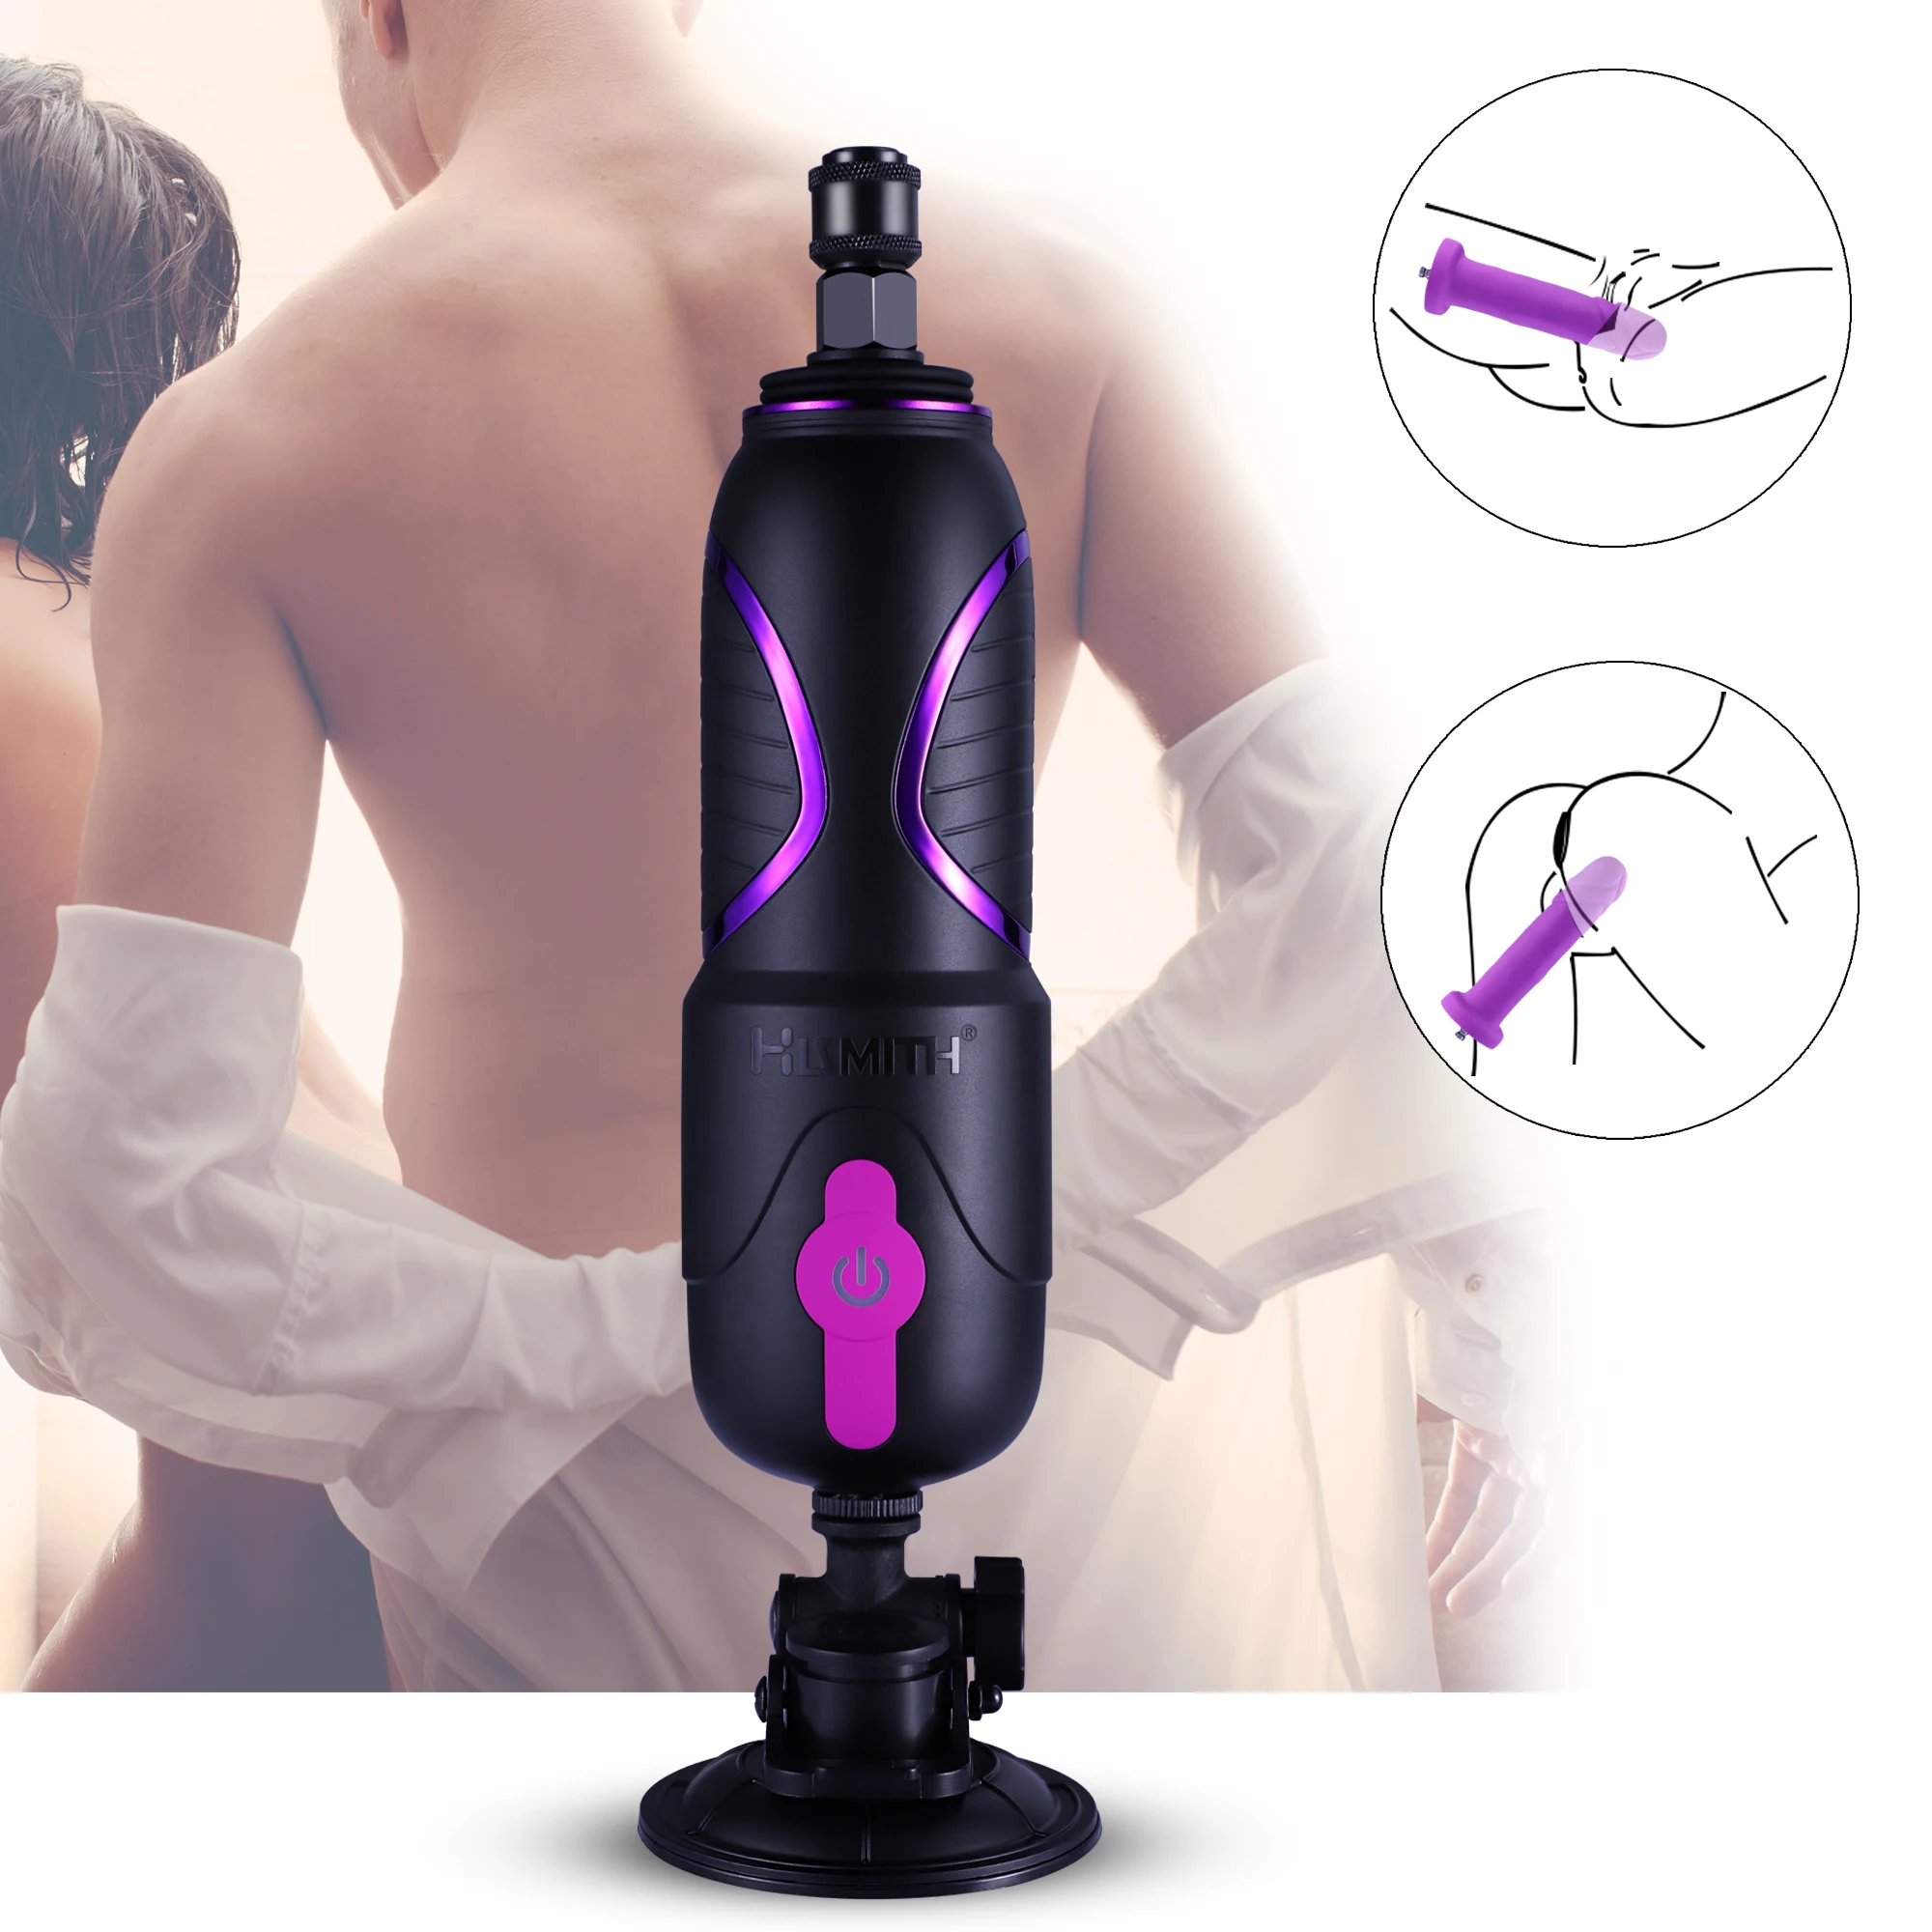 Hismith Pro Traveler Portable Sex Machine App Controlled With Remote